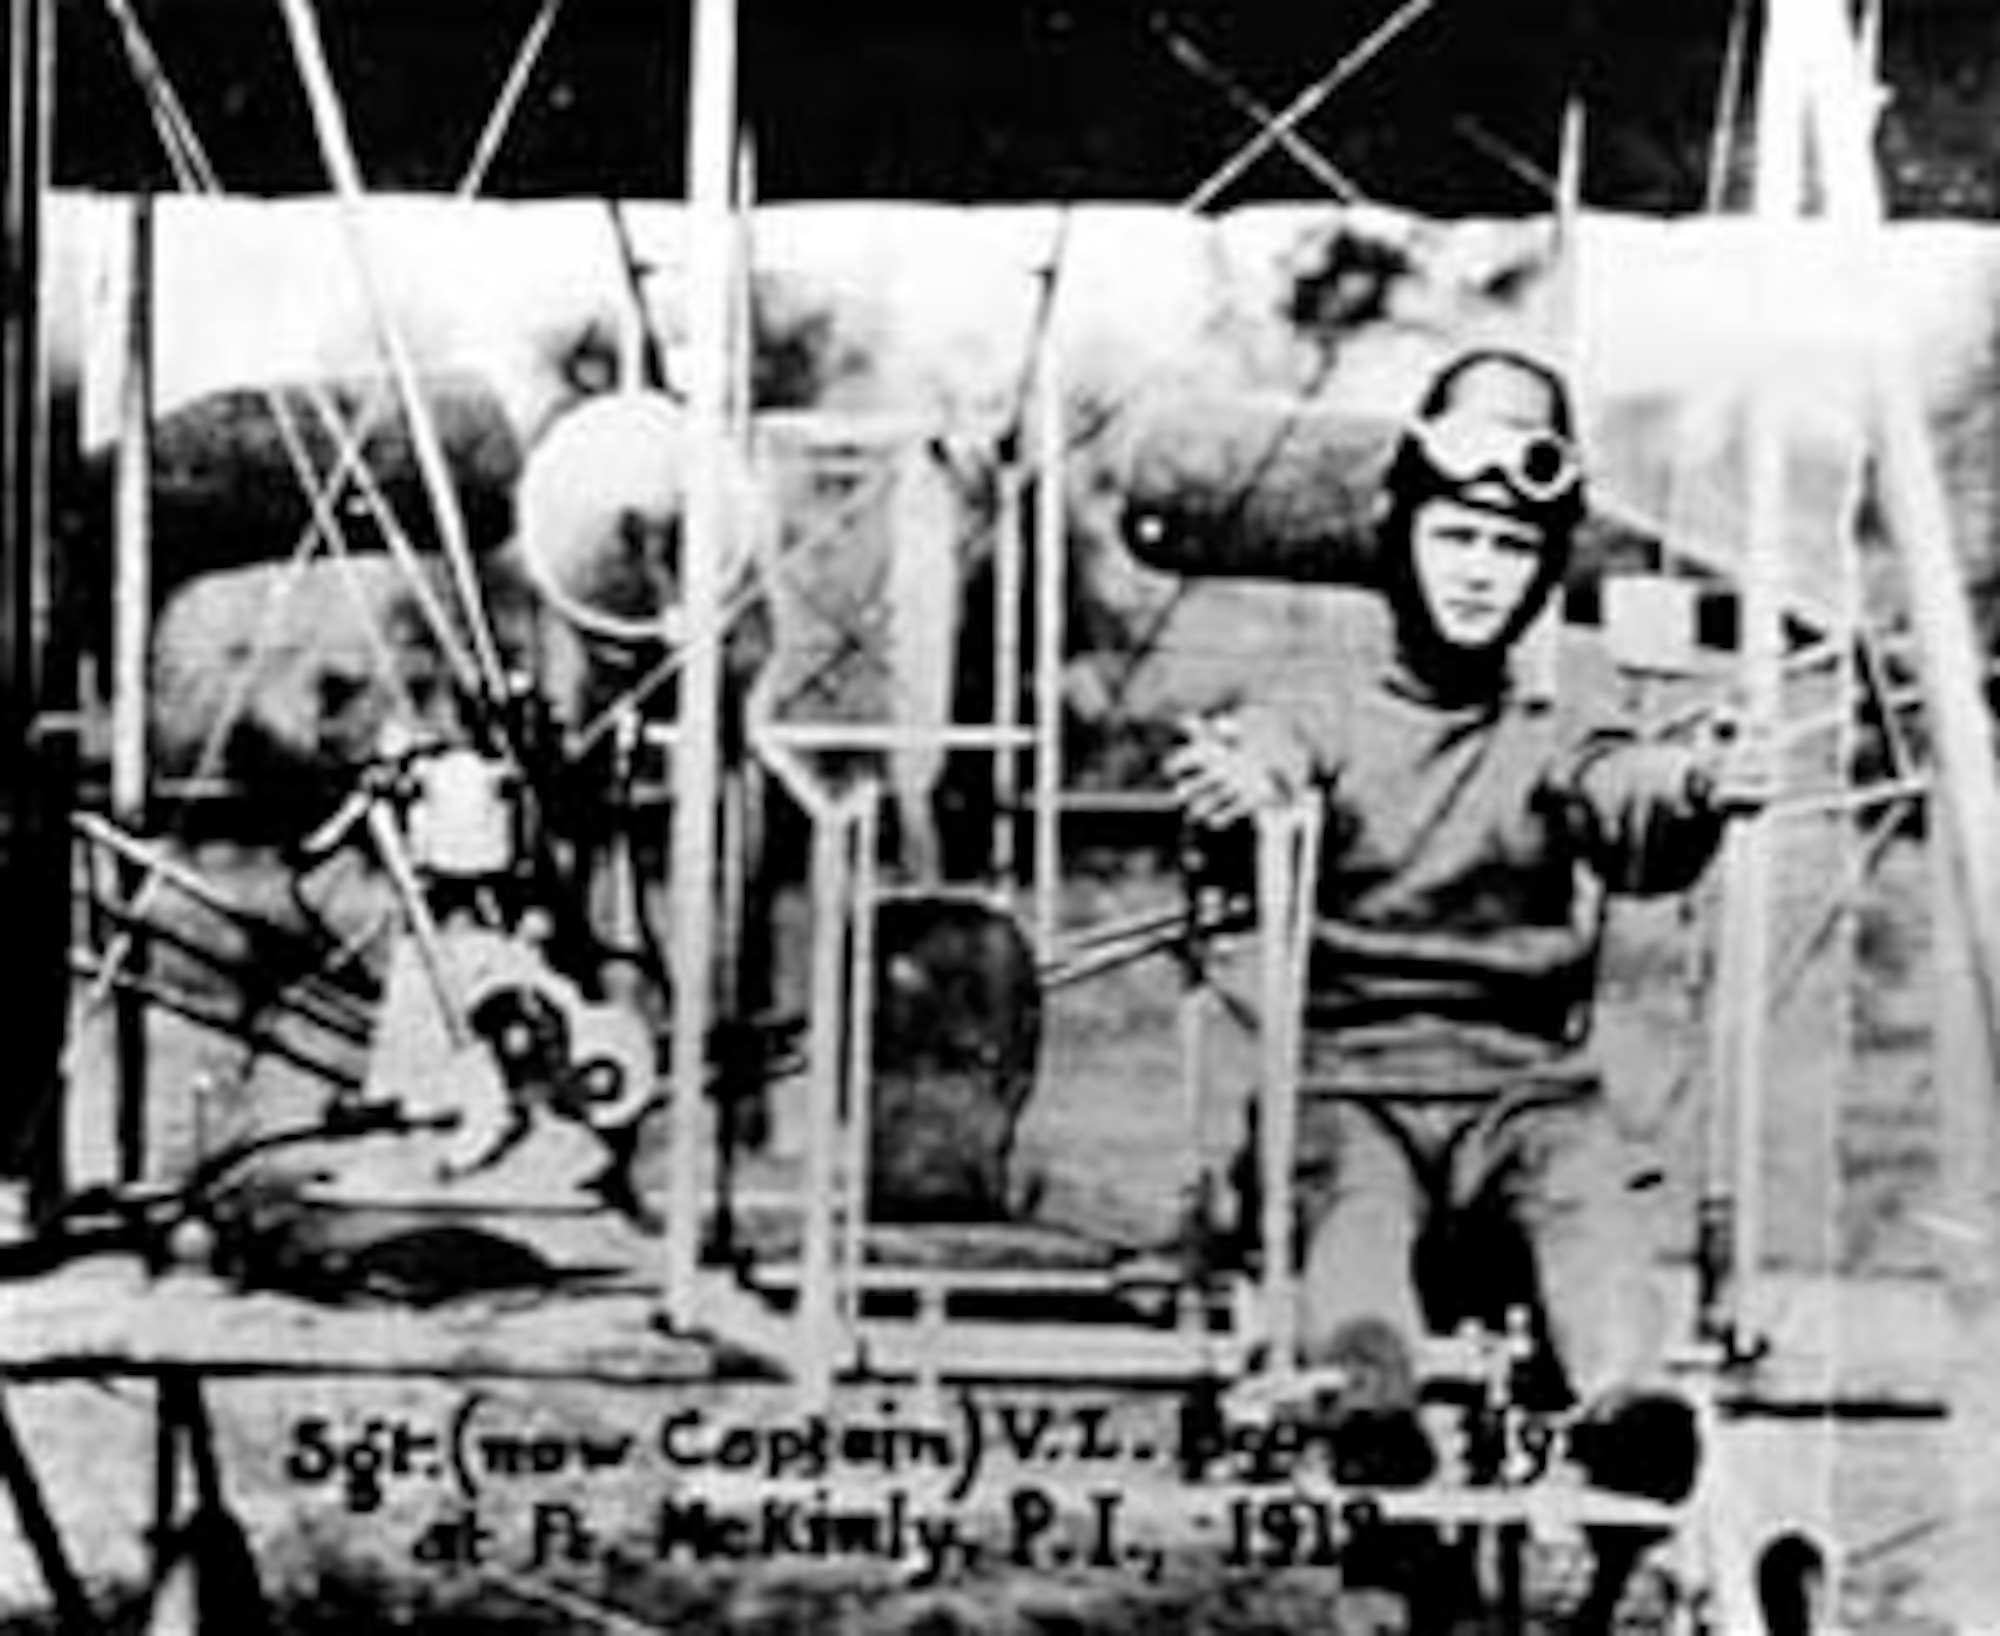 The first USAF enlisted pilot, Sgt. (later Col.) Vernon L. Burge, seated in an Army "B" airplane in the Philippines in 1912. Like many enlisted pilots who followed, he was an aircraft mechanic prior to earning wings. (U.S. Air Force photo)